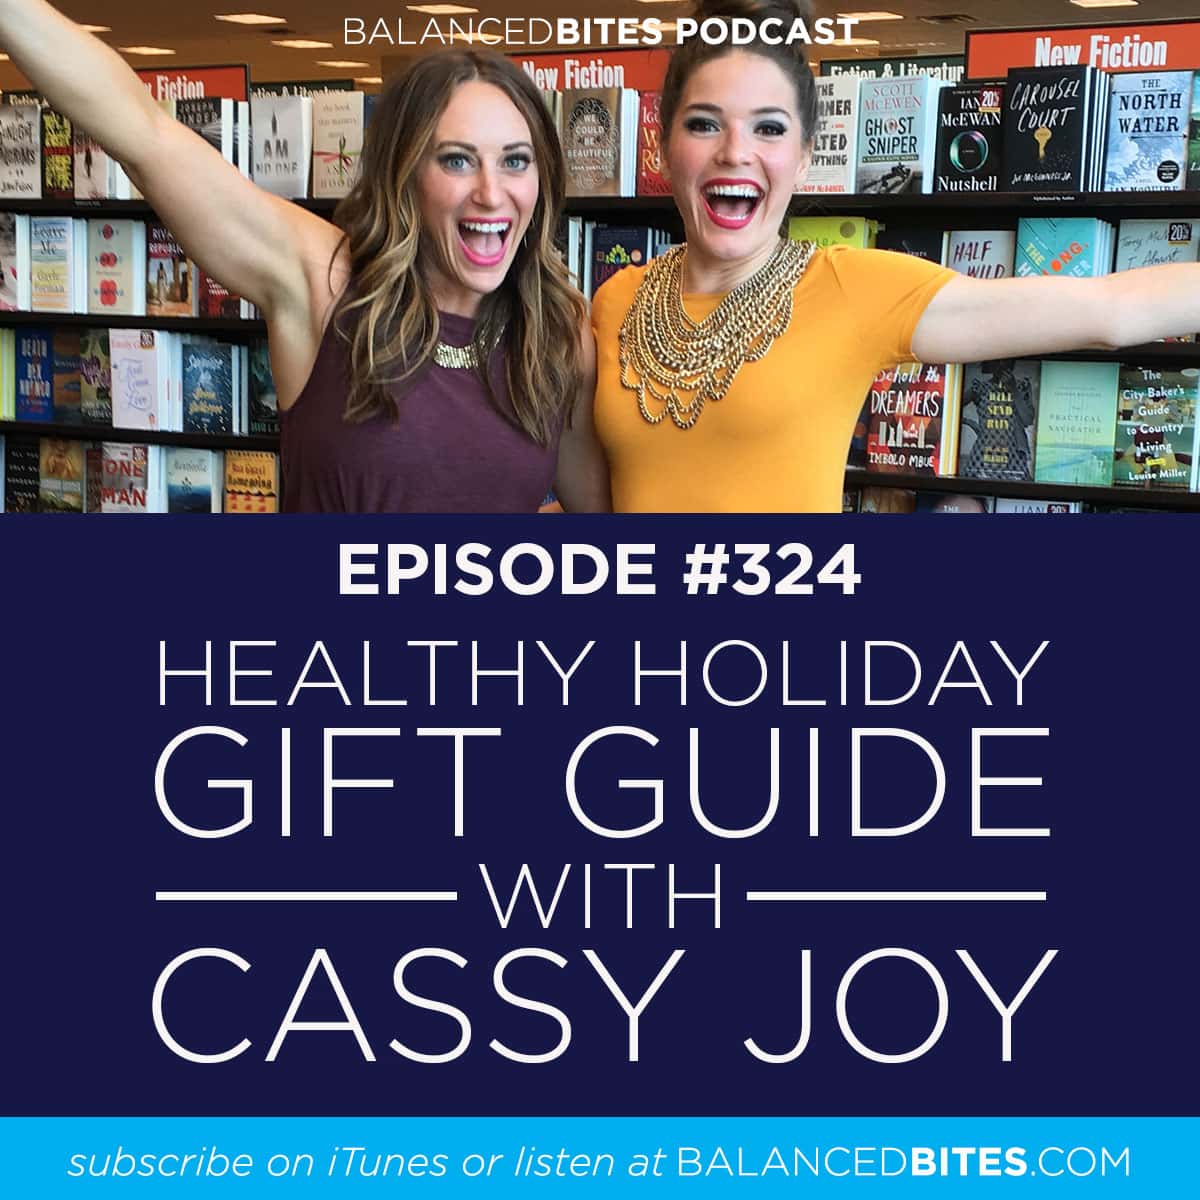 Balanced Bites Podcast with Diane Sanfilippo & Liz Wolfe | Healthy Holiday Gift Guide with Cassy Joy